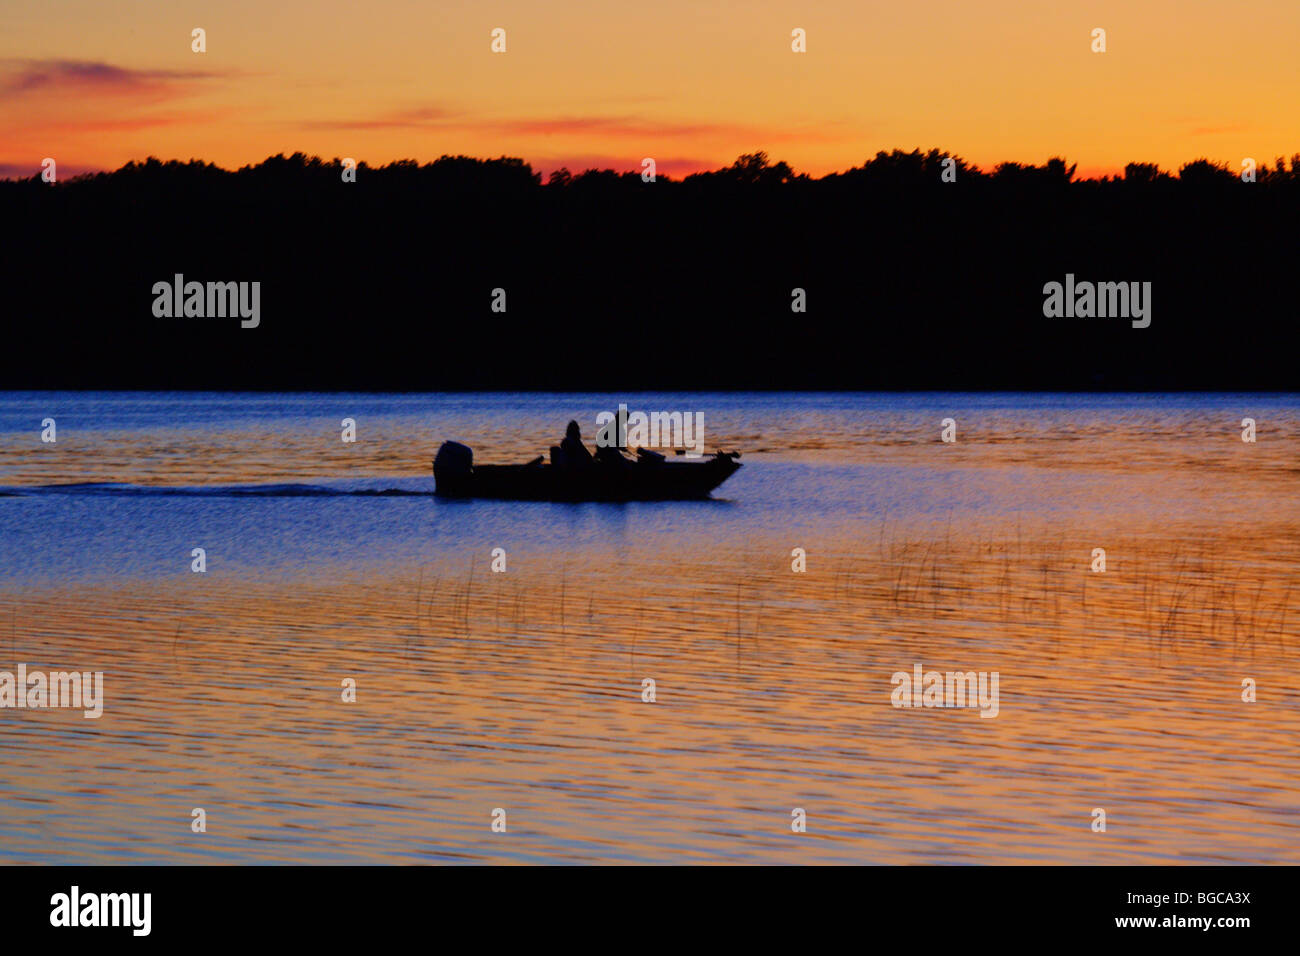 silhouette two fisherman in boat on lake at sunset Stock Photo